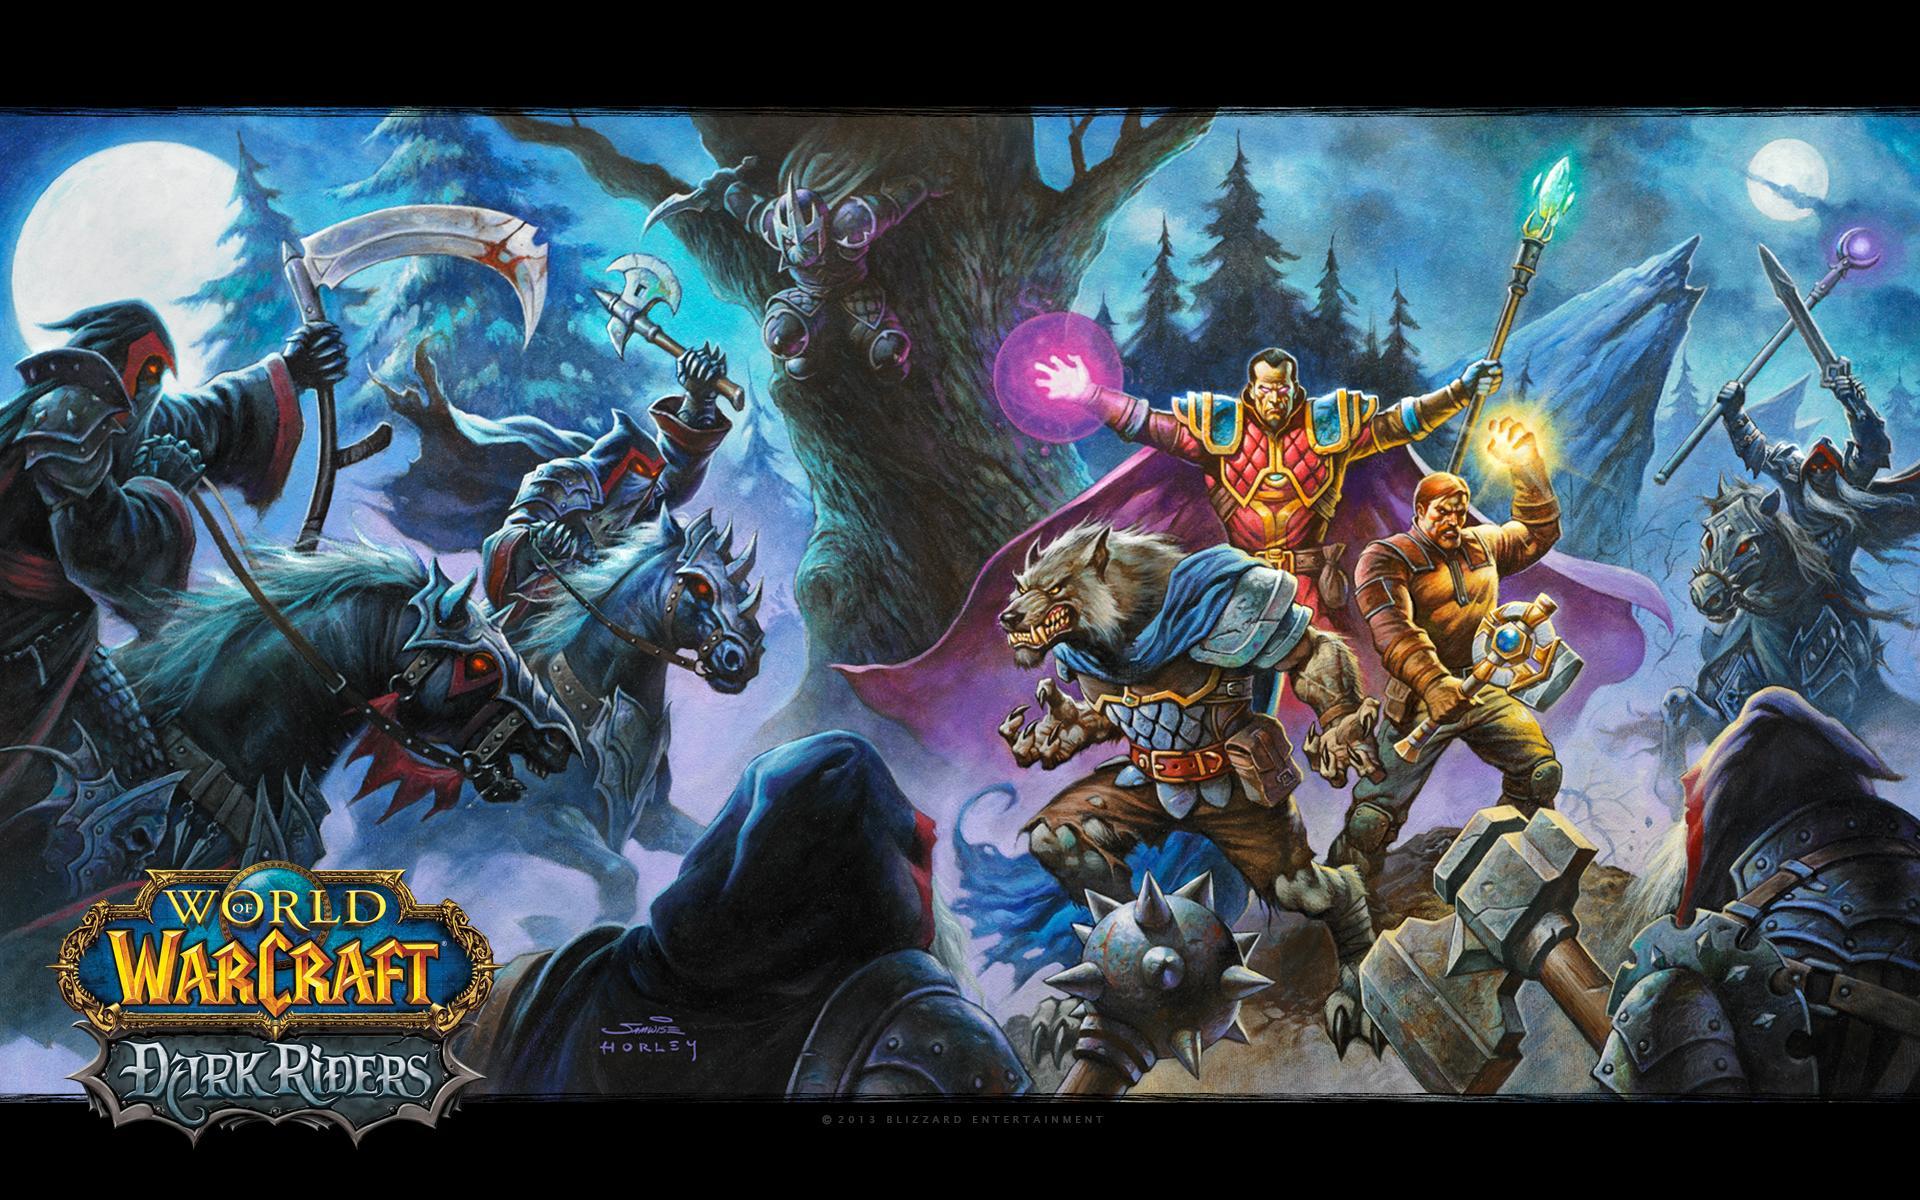 Blizzplanet The Official World of Warcraft: Dark Riders Wallpaper